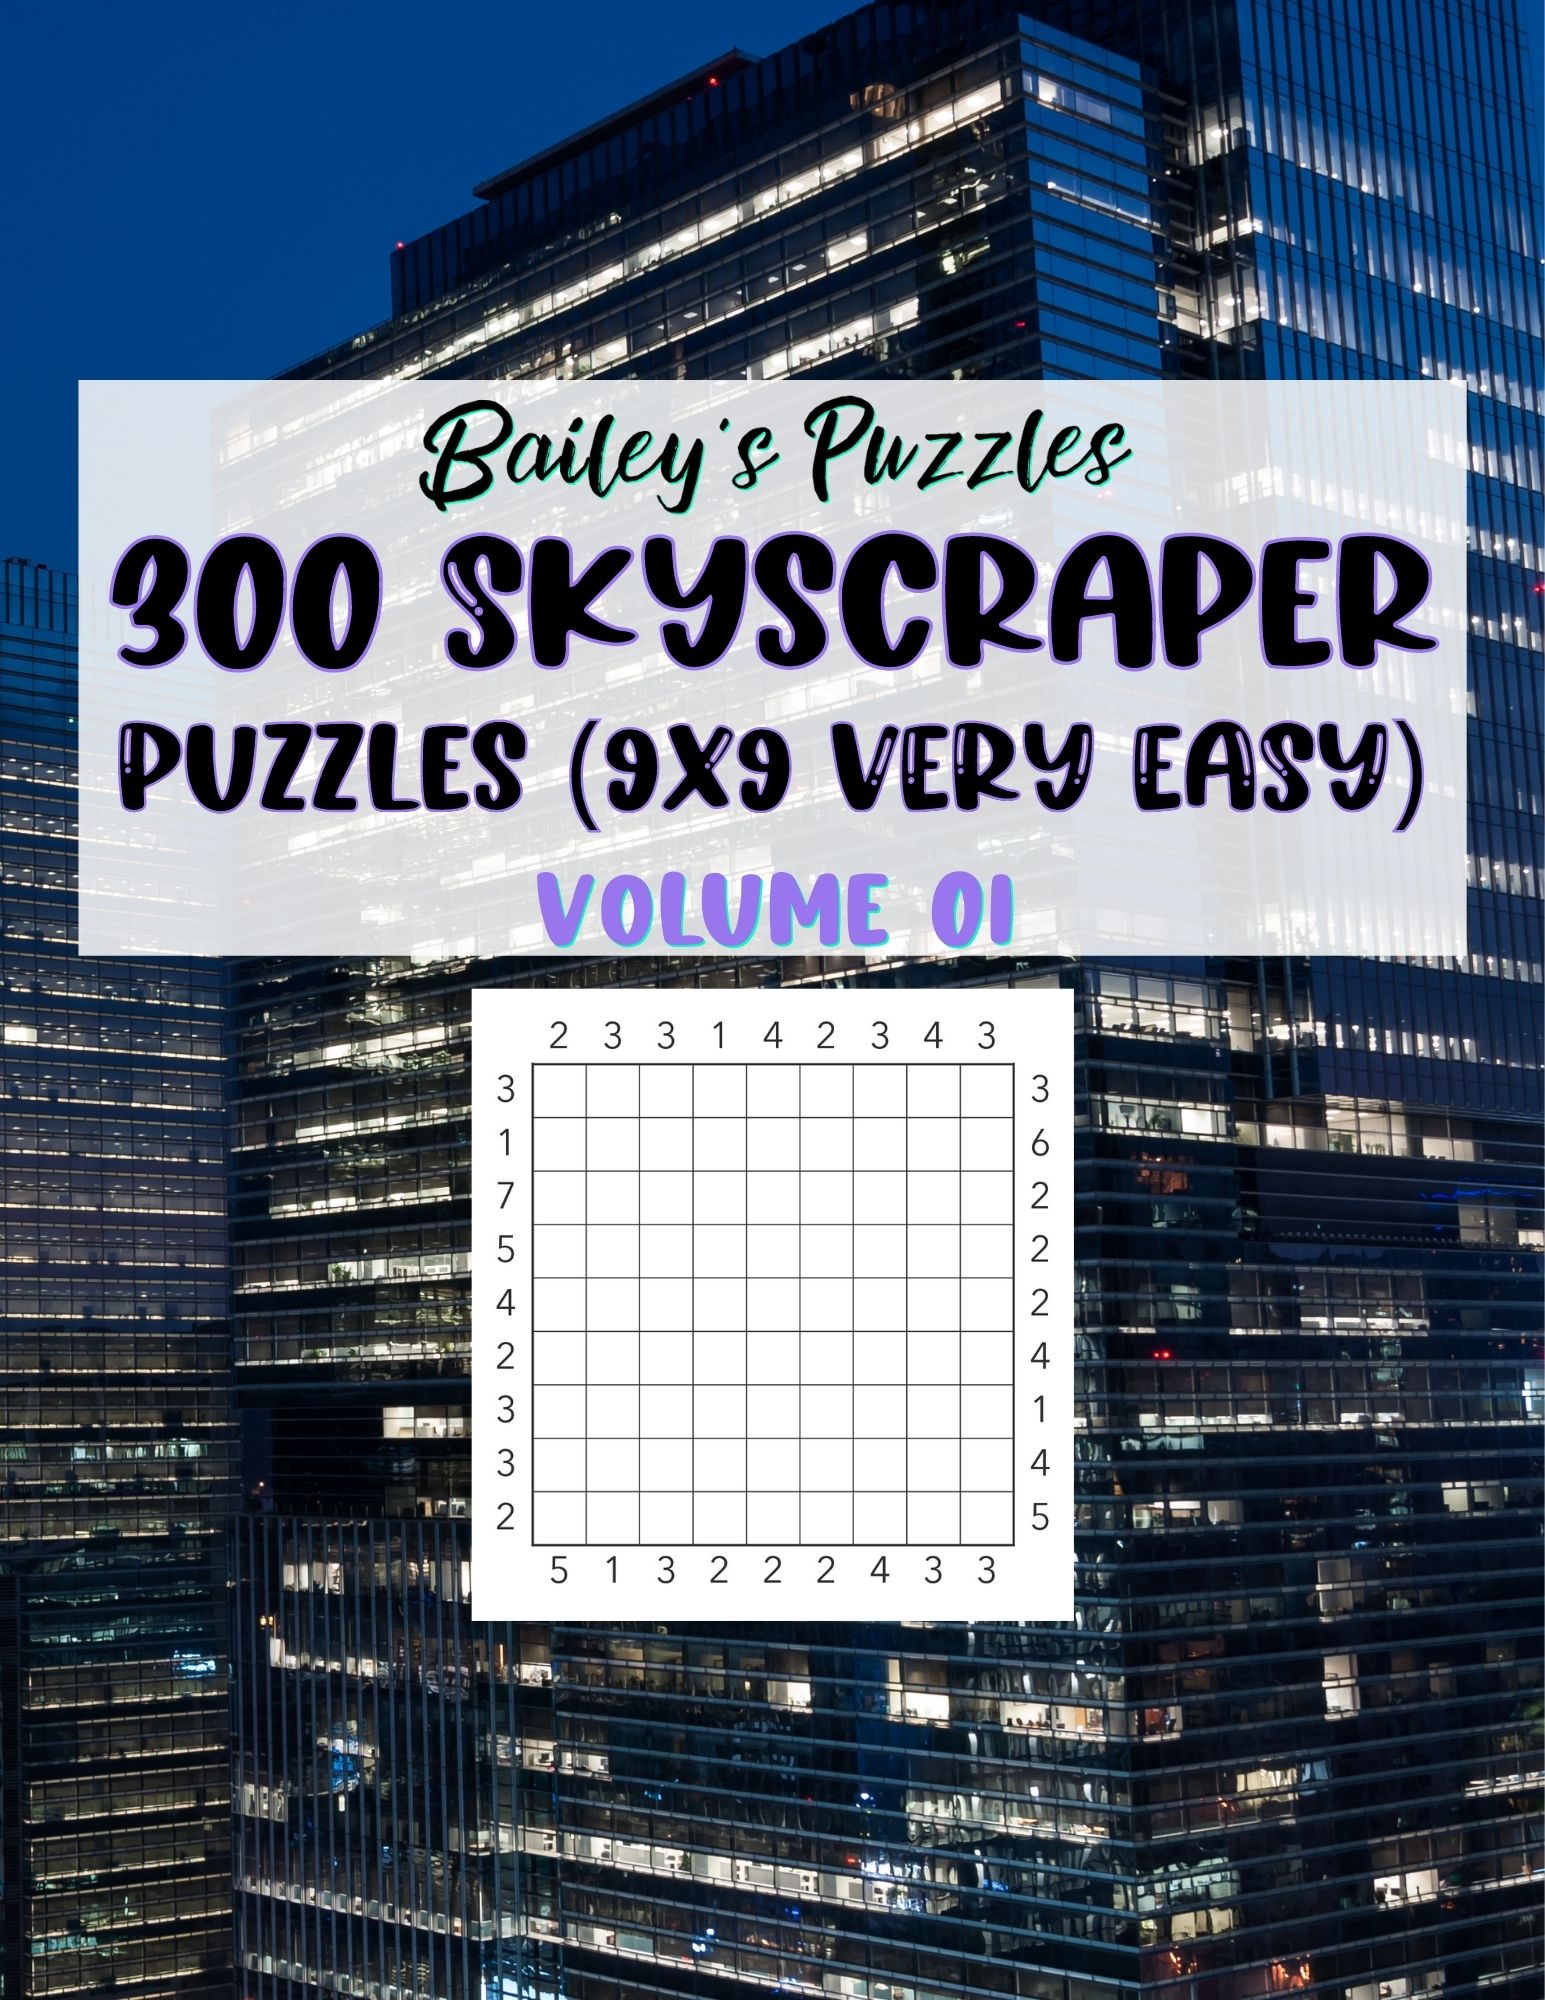 Front Cover - 450 Skyscraper Puzzles (9x9, very easy)